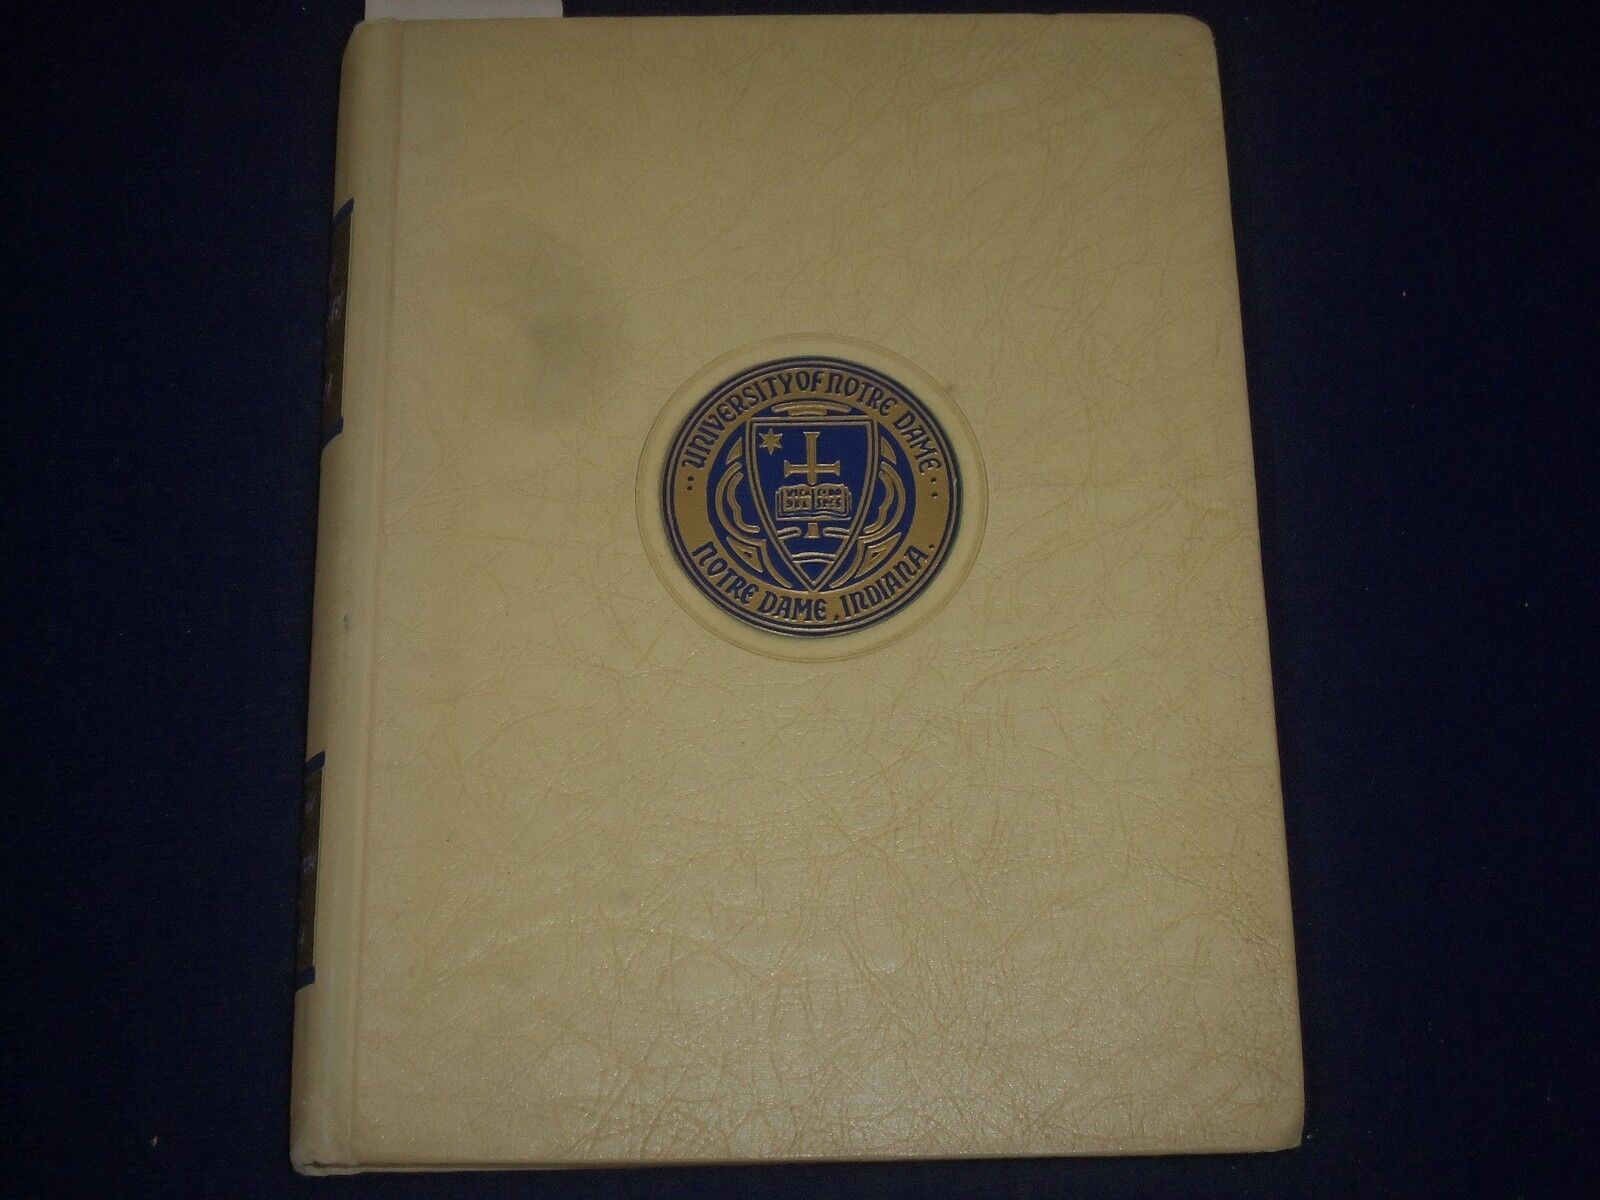 1947 THE DOME UNIVERSITY OF NOTRE DAME YEARBOOK - JOHNNY LUJACK - LEAHY - YB 50